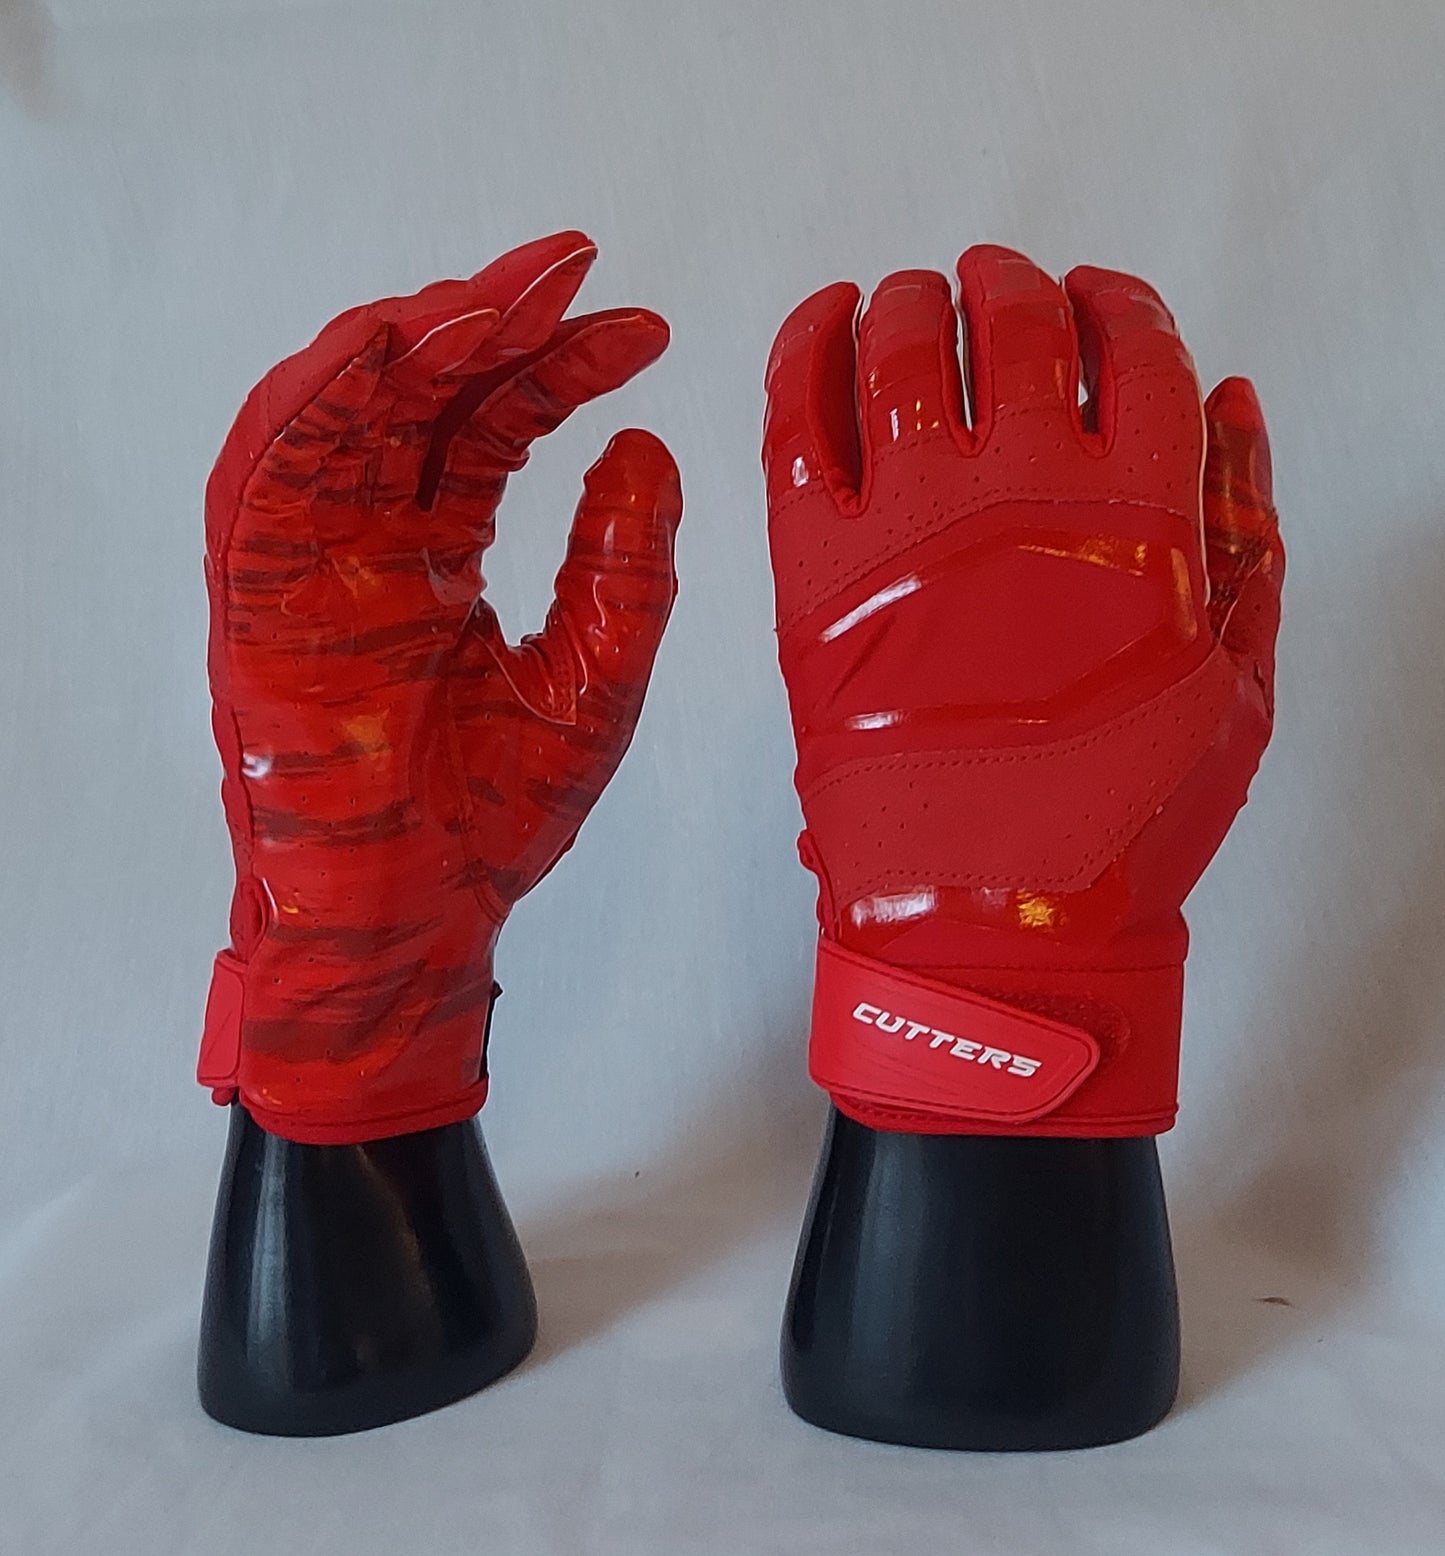 Cutters REV PRO 3 Football Gloves - Red